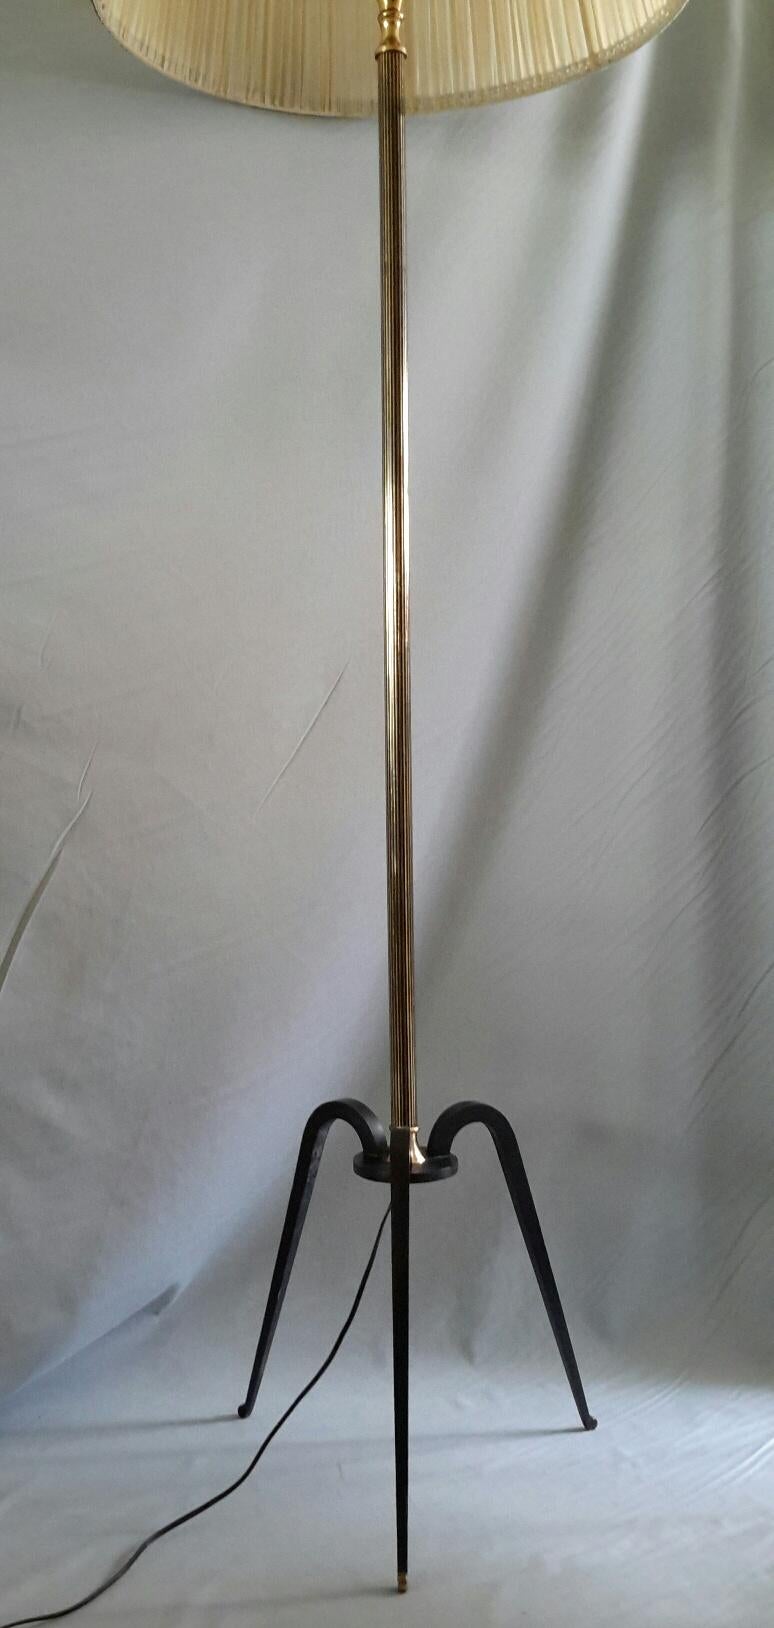 Cotton Elegant French Mid-Century Modern Bronze Lamp Floor by Arlus, 1950s For Sale